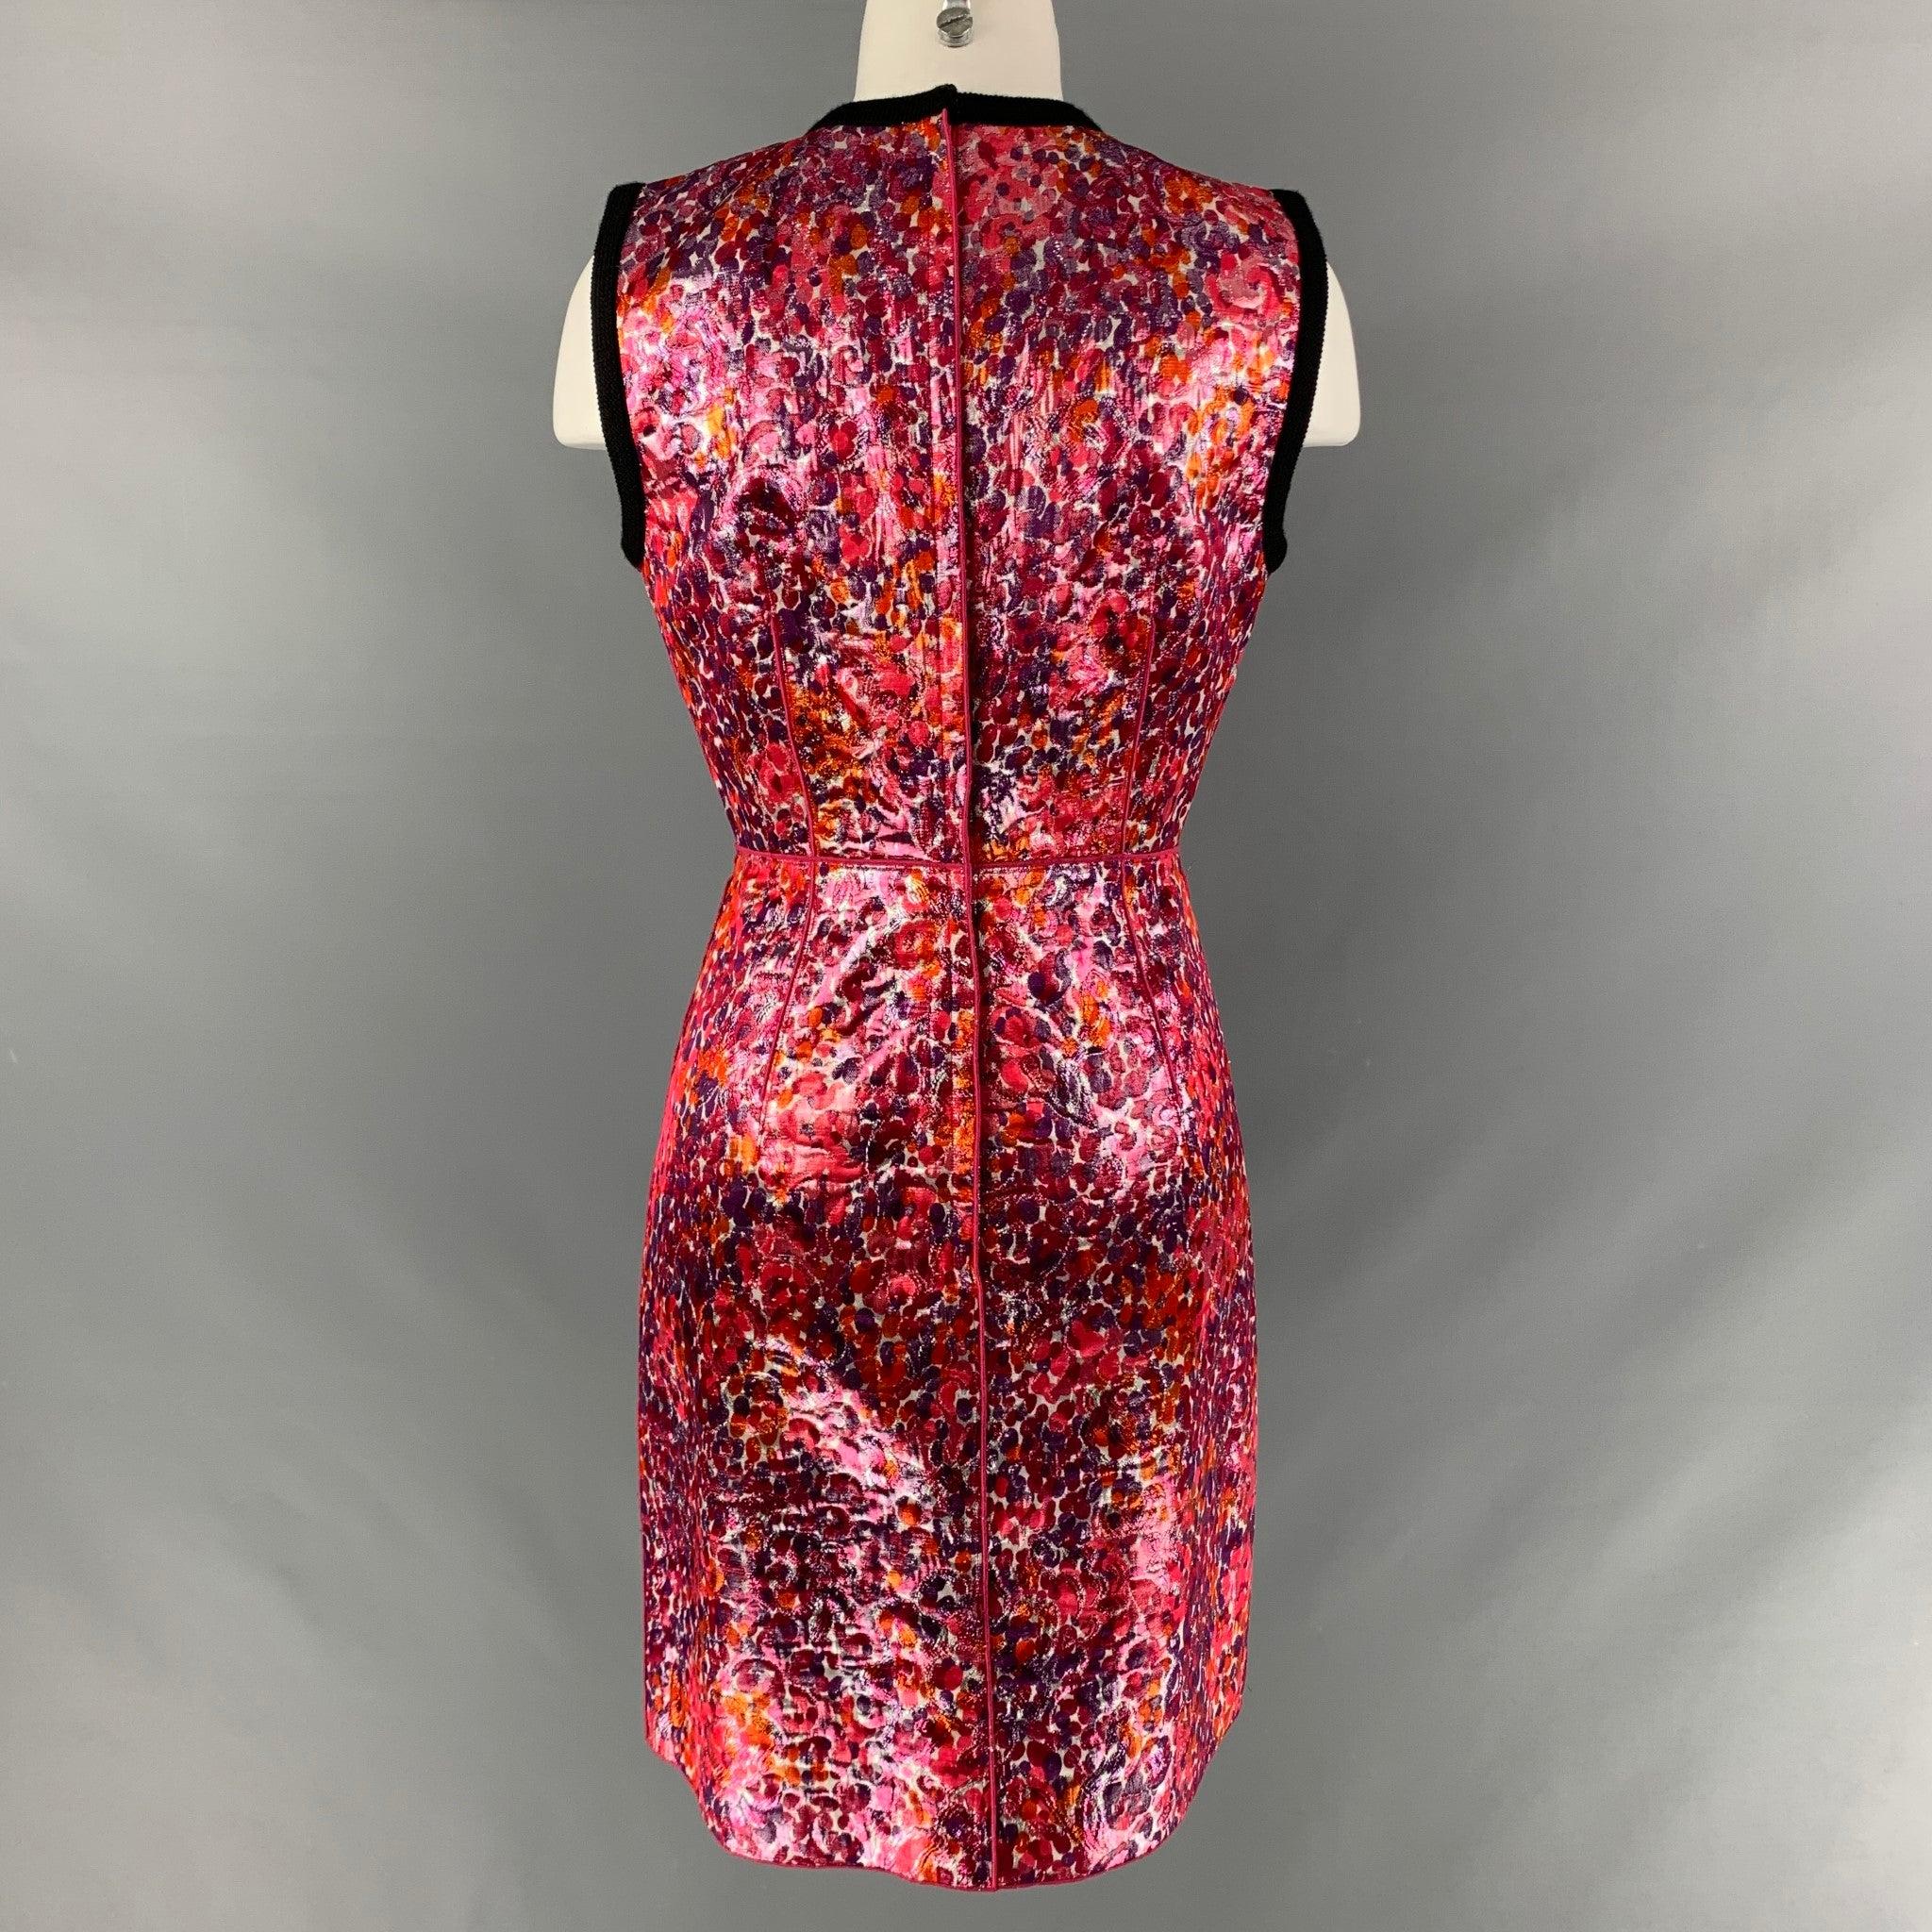 MARC JACOBS Size 6 Multi-Color Acetate Blend Jacquard Shift Dress In Excellent Condition For Sale In San Francisco, CA